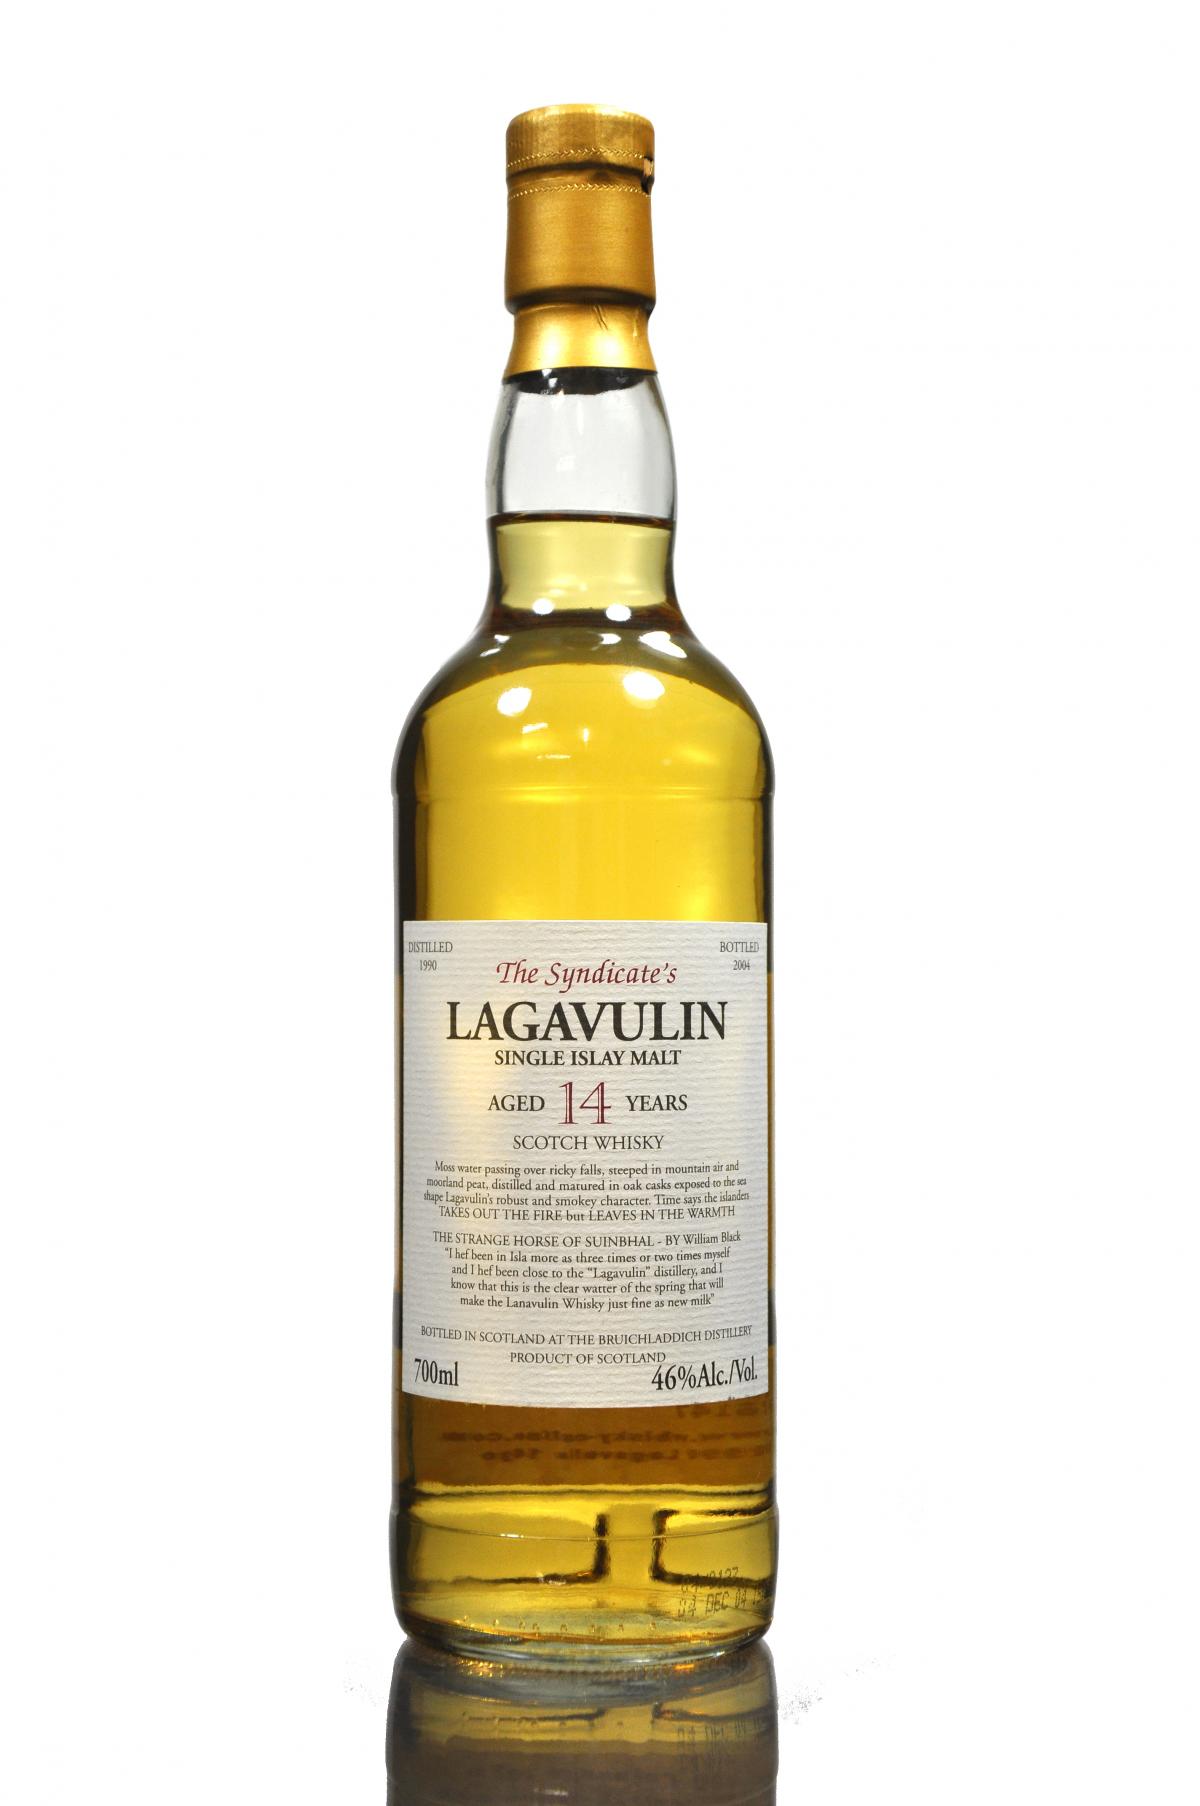 Lagavulin 14 Year Old - The Syndicate